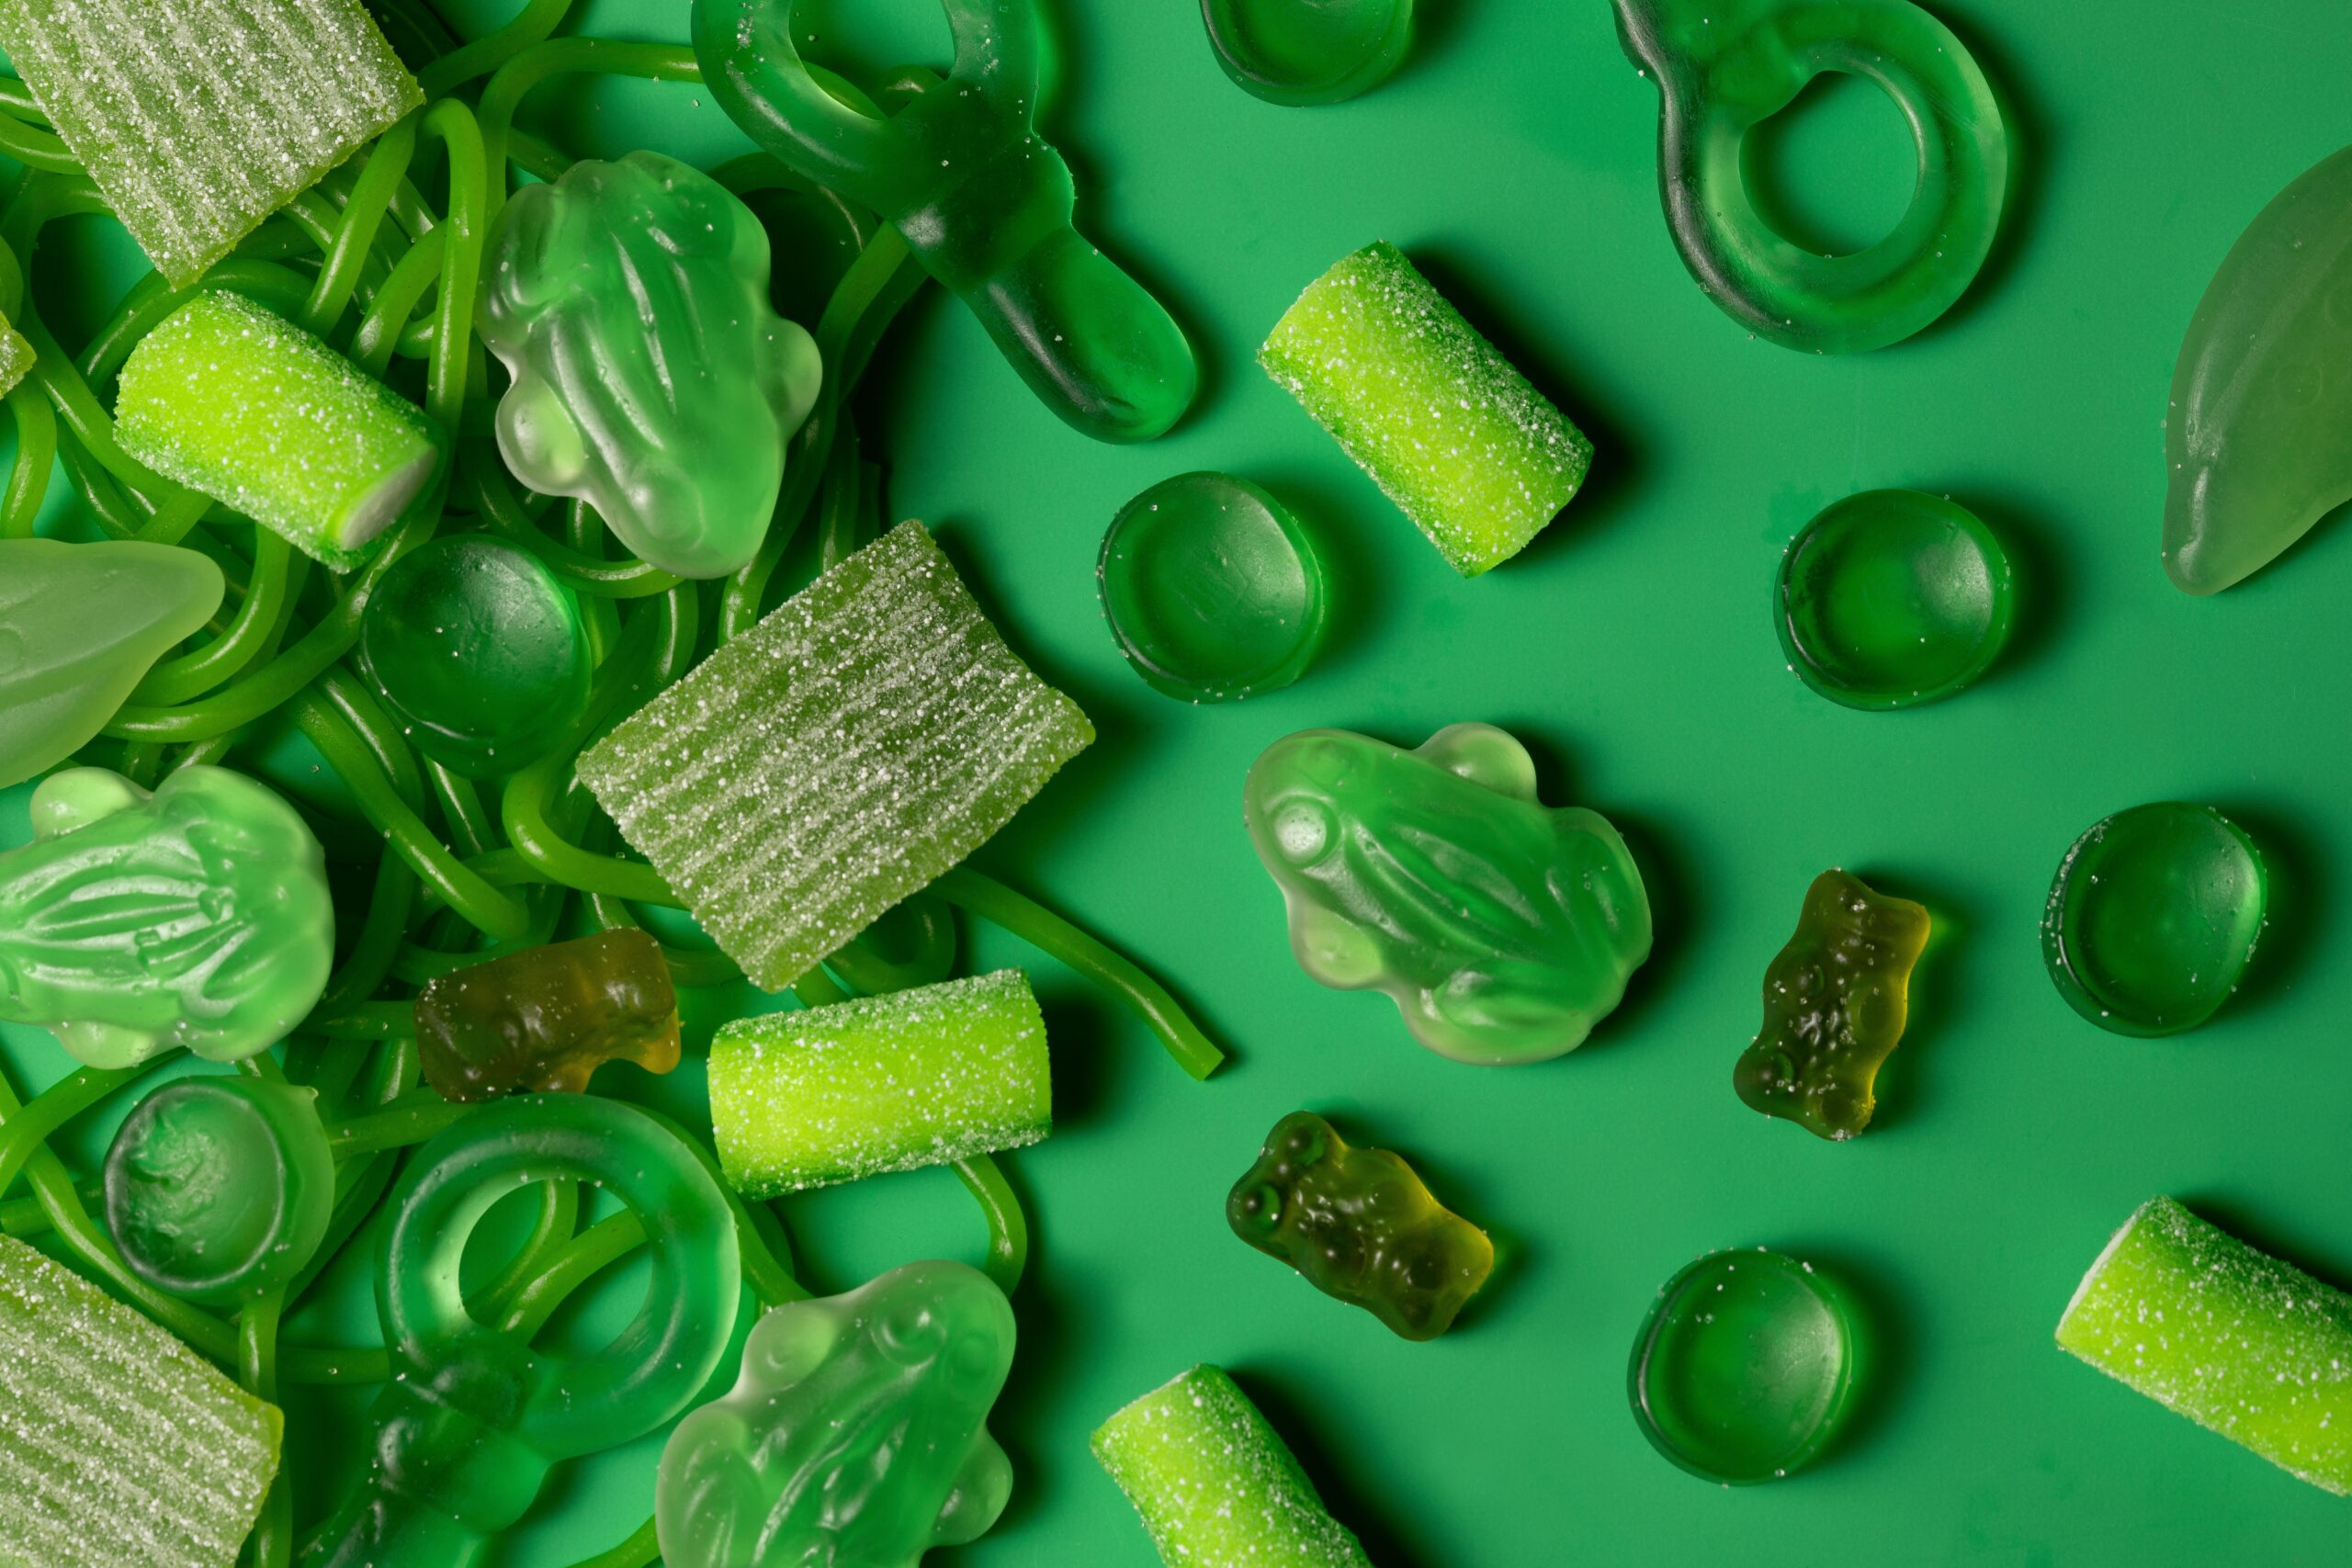 An array of translucent green jelly candies placed on a bright background.